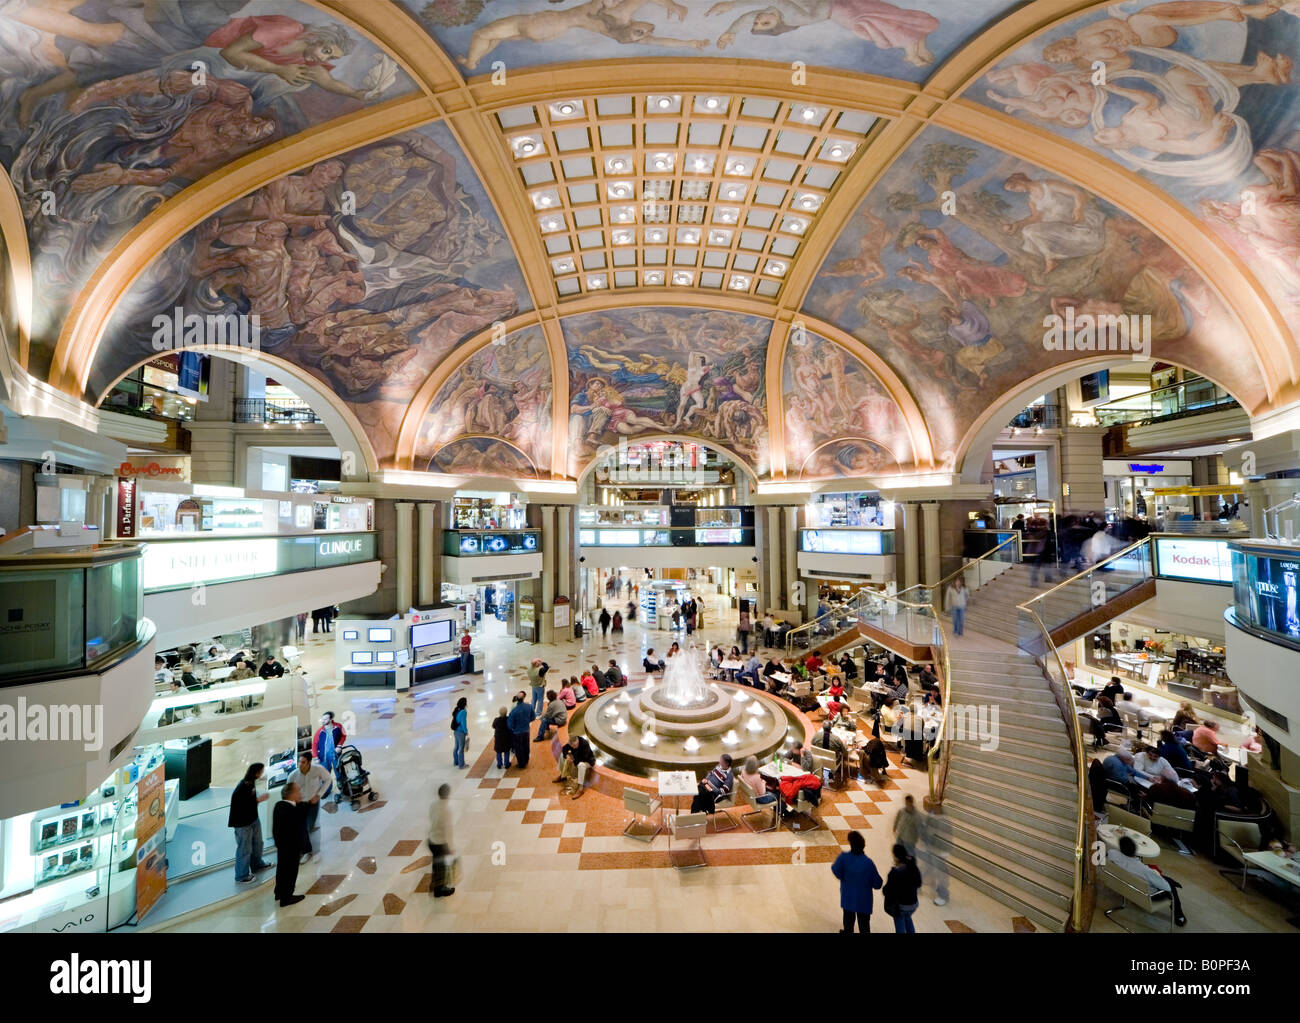 The world famous fresco ceiling paintings in the Galeria Pacifico shopping mall in Buenos Aires, Argentina. Stock Photo